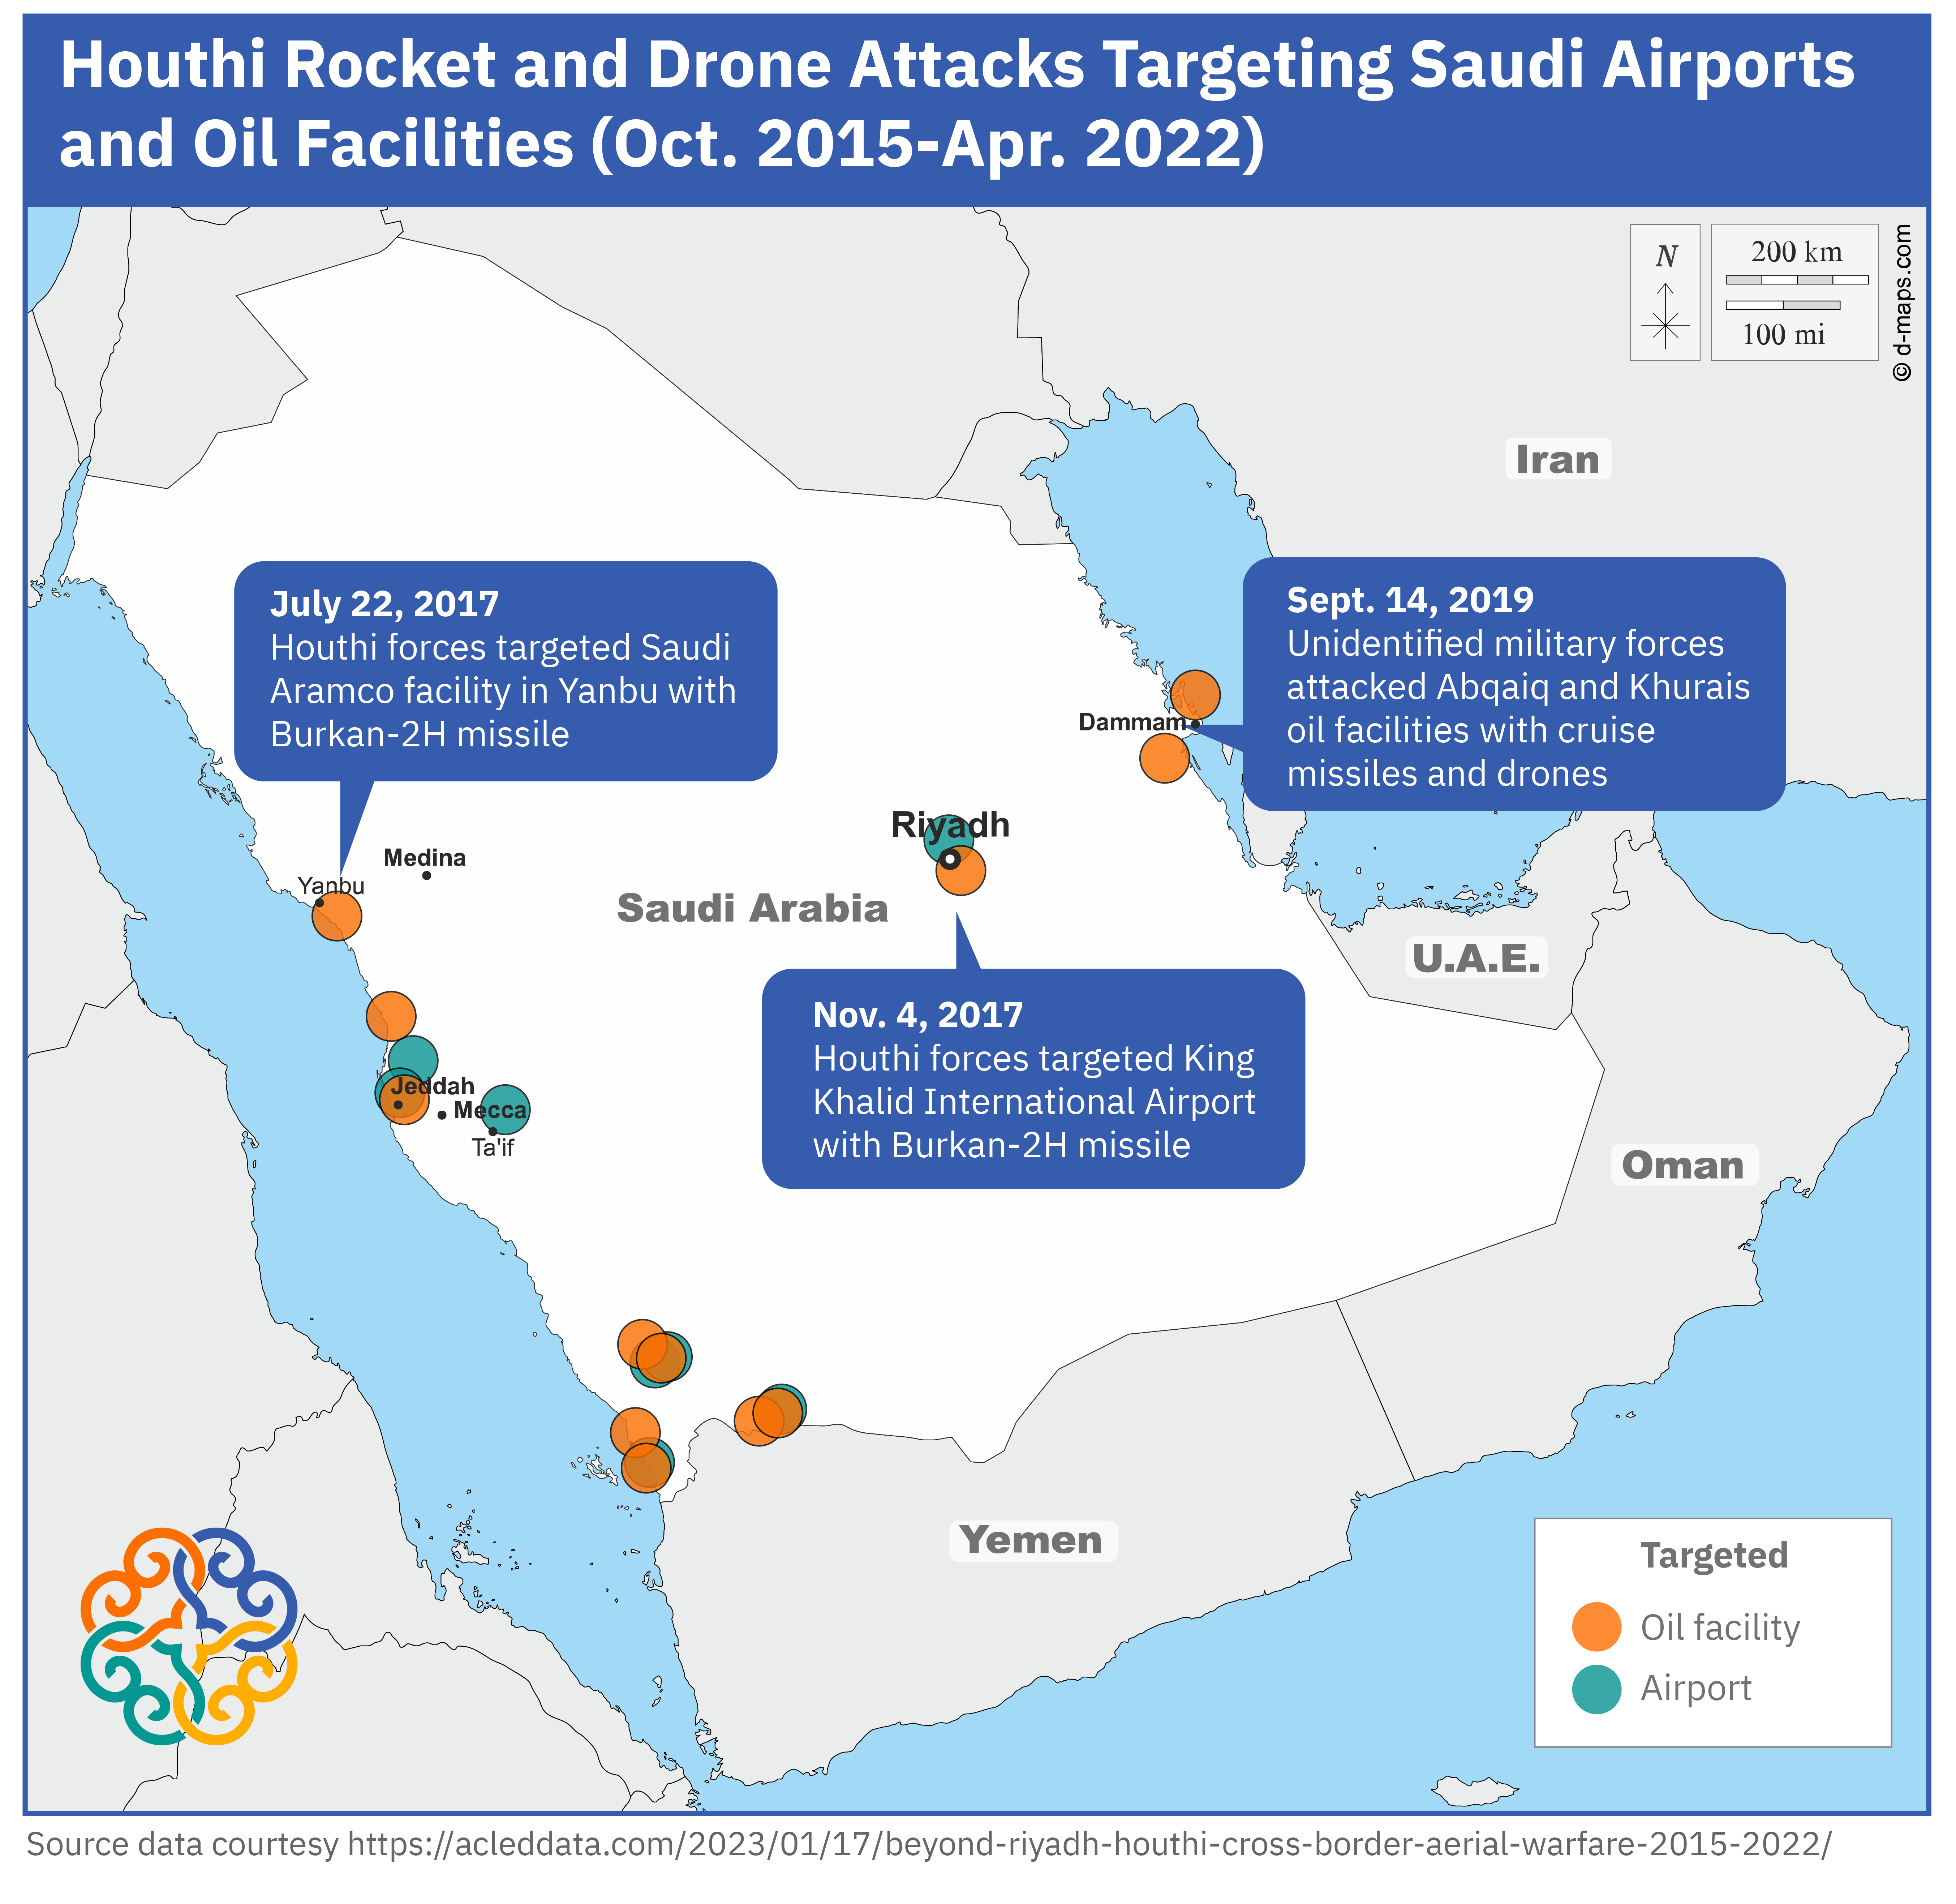 Map of Houthi Rocket and Drone Attacks Targeting Saudi Airports and Oil Facilities